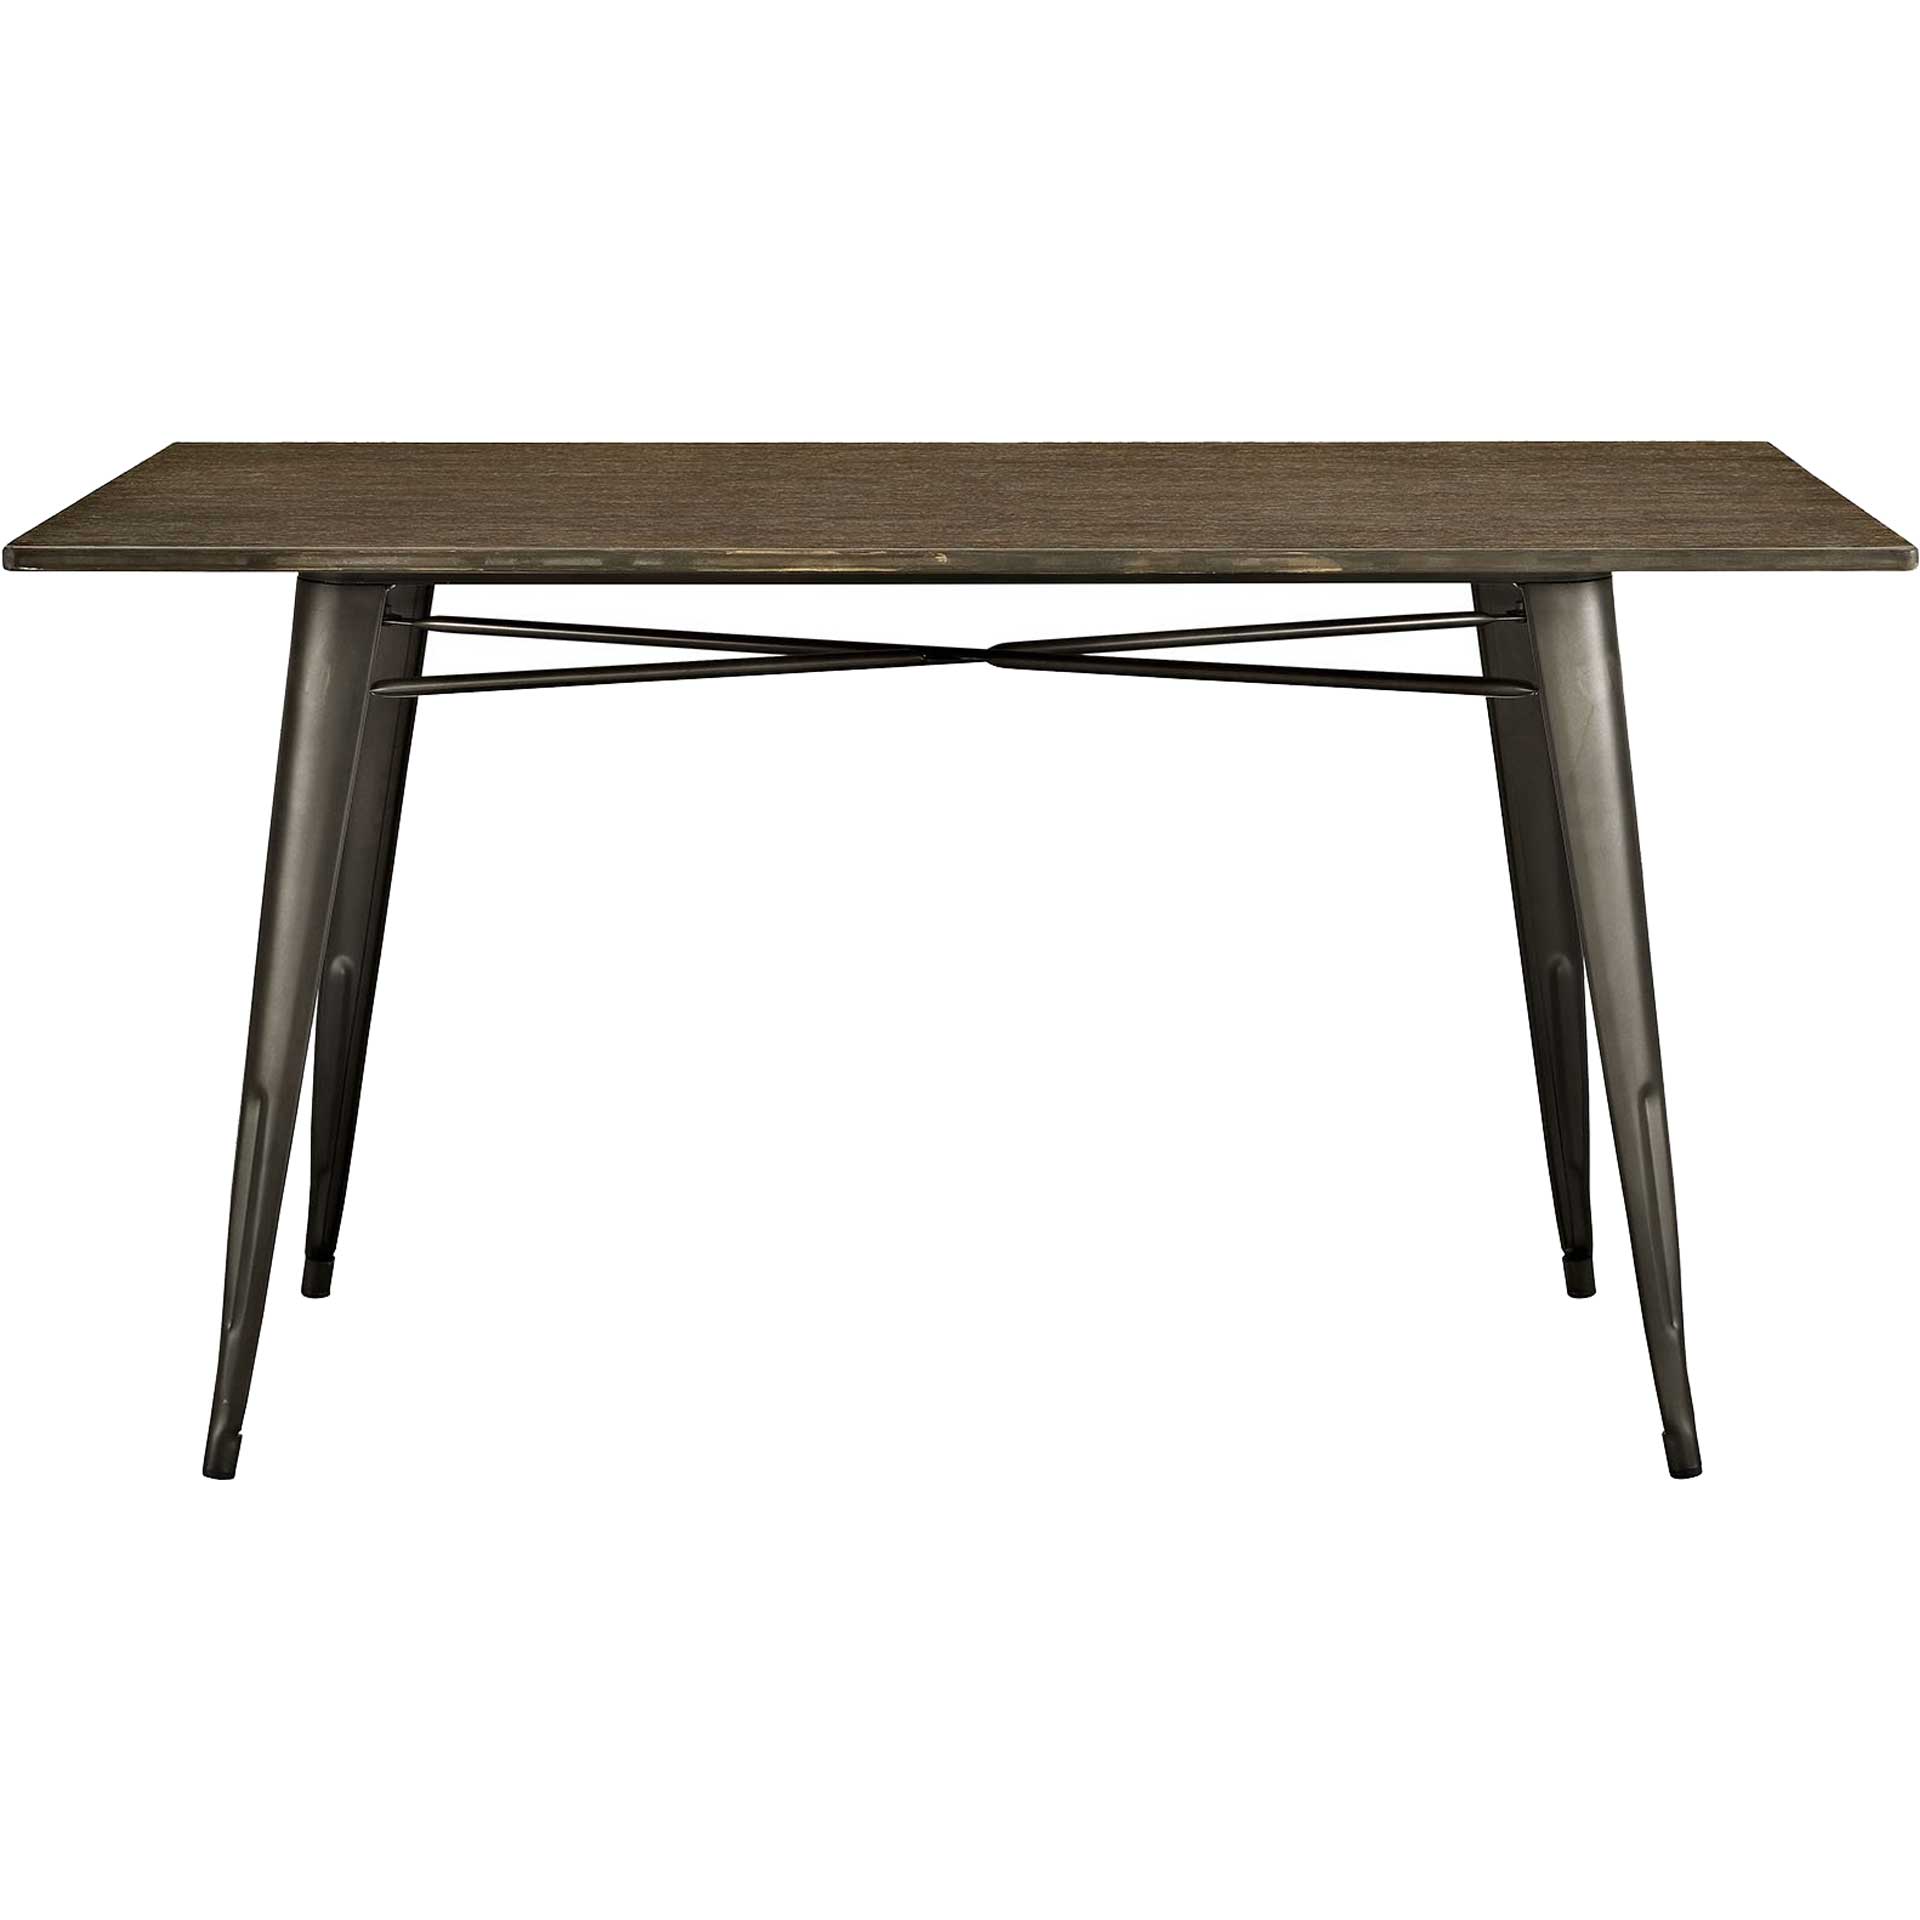 Anthropology Rectangle Wood Dining Table Brown